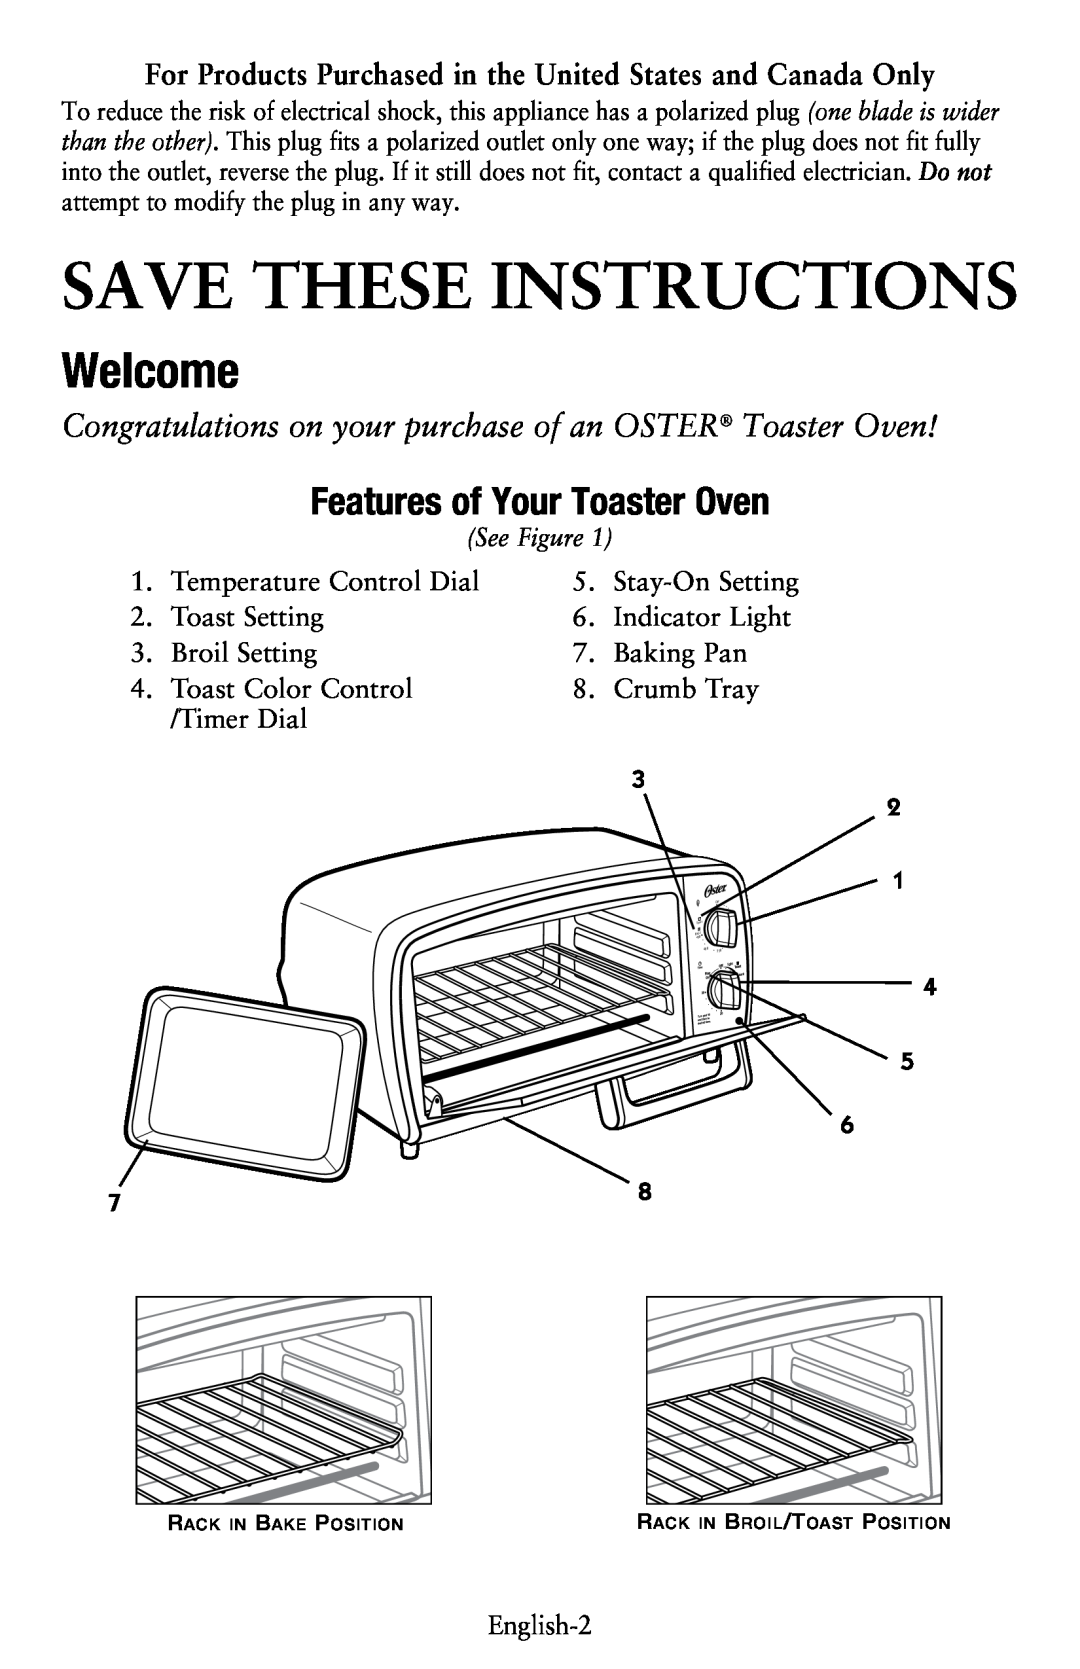 Oster TSSTTVVGS1, TSSTTVVG01 manual Save These Instructions, Welcome, Features of Your Toaster Oven, See Figure 